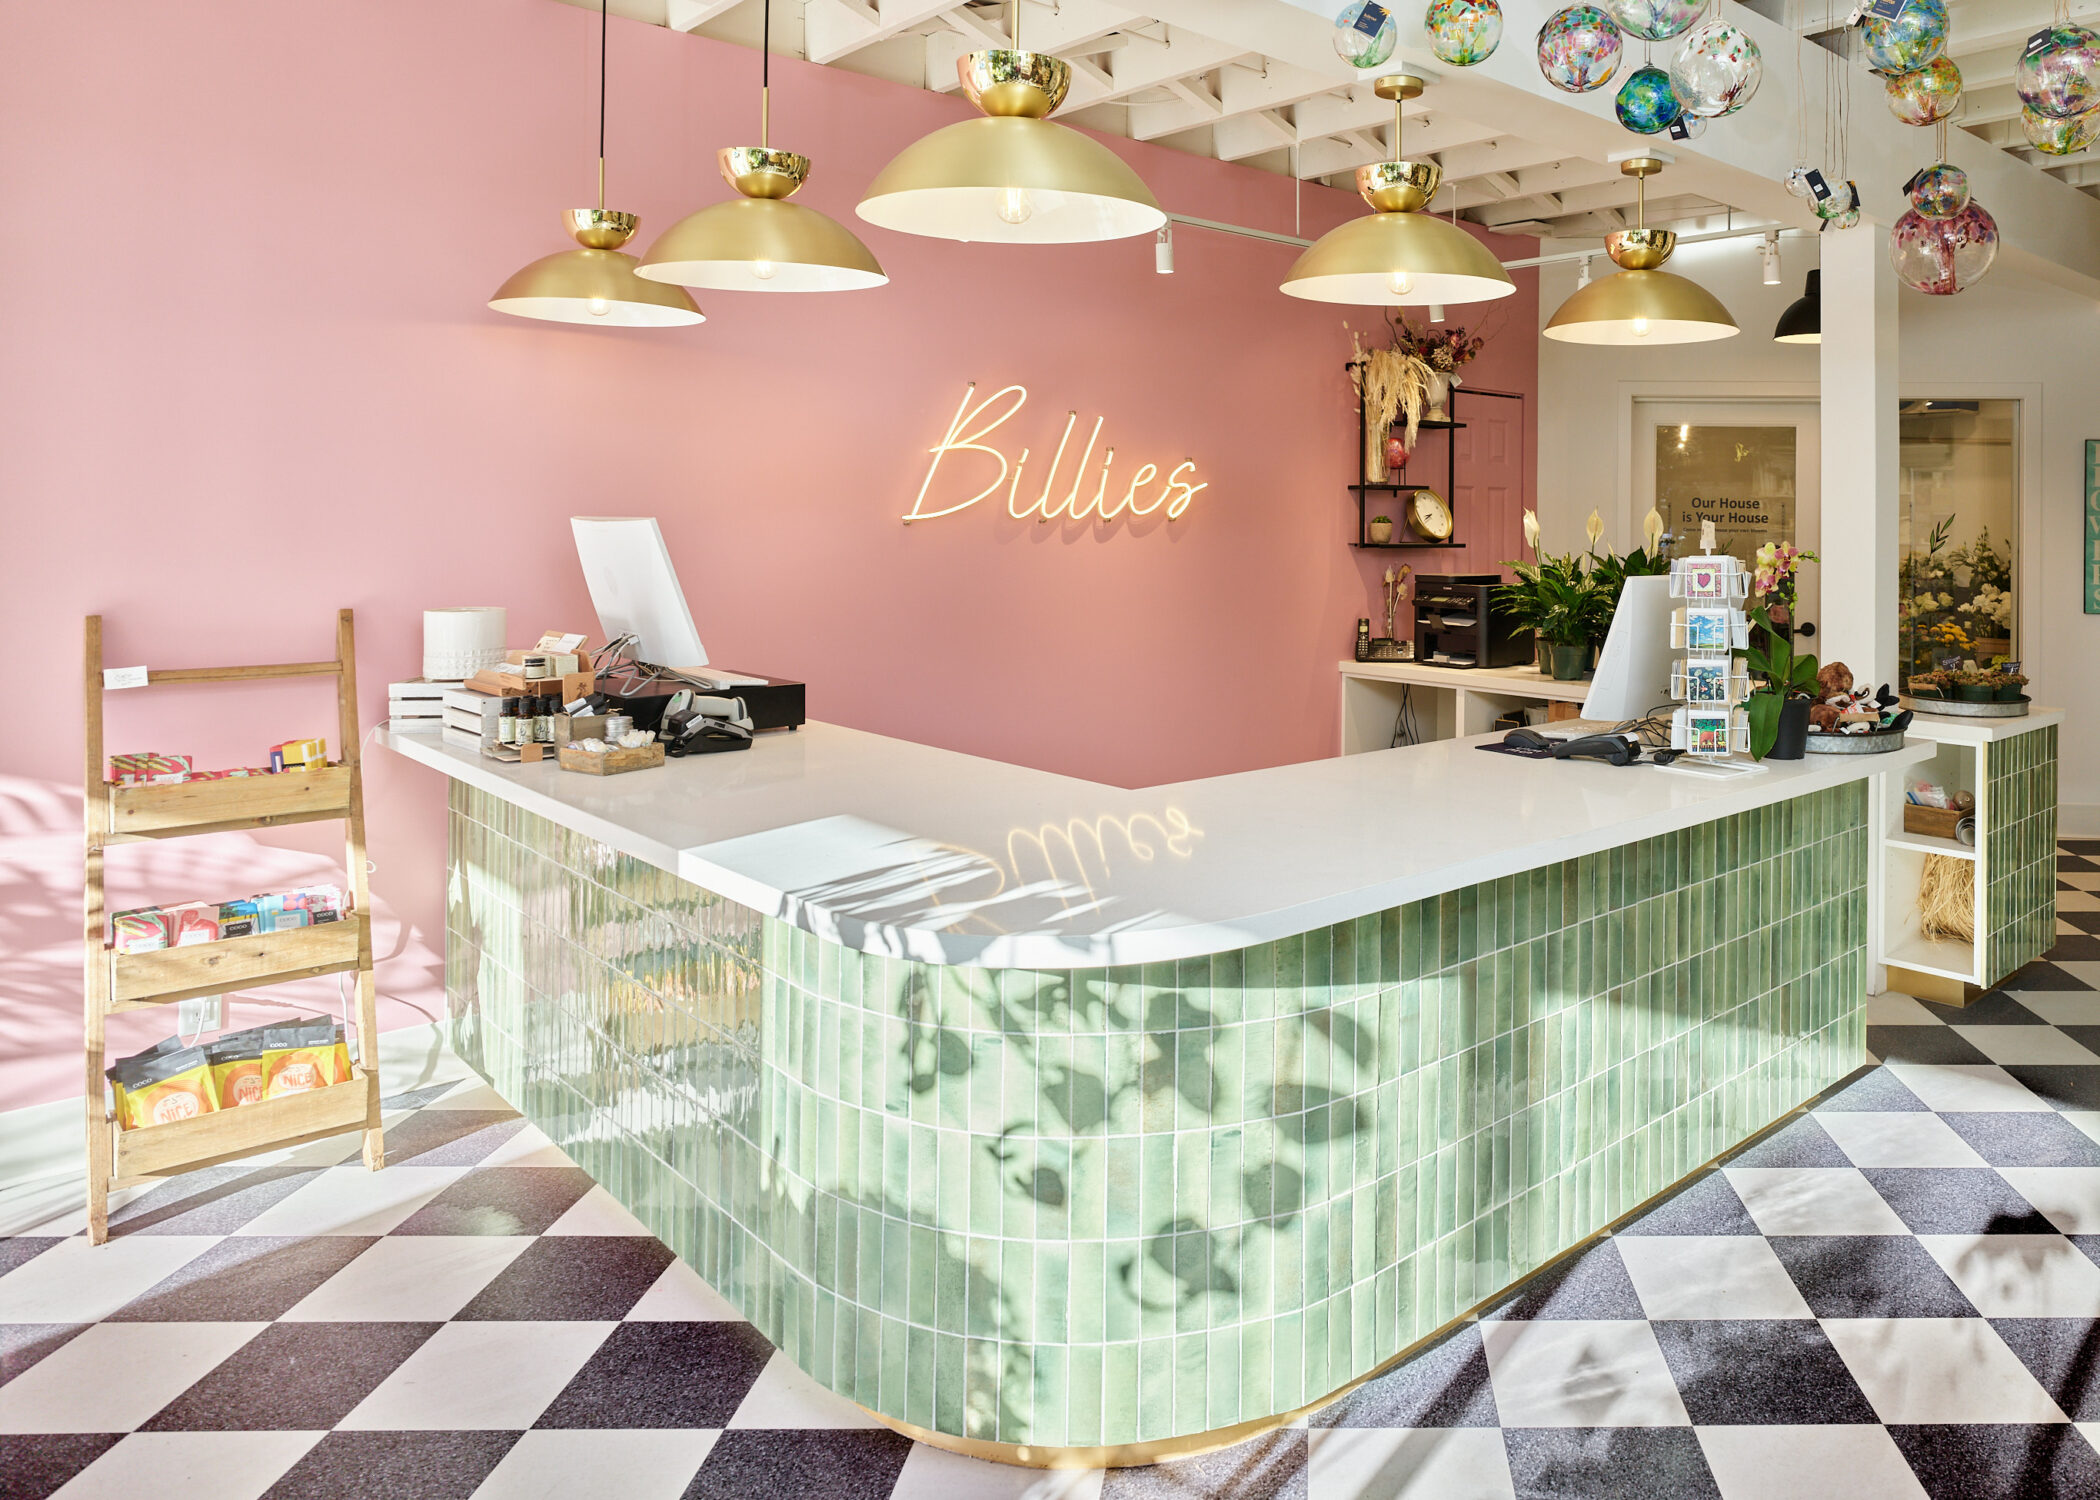 Billies house counter front